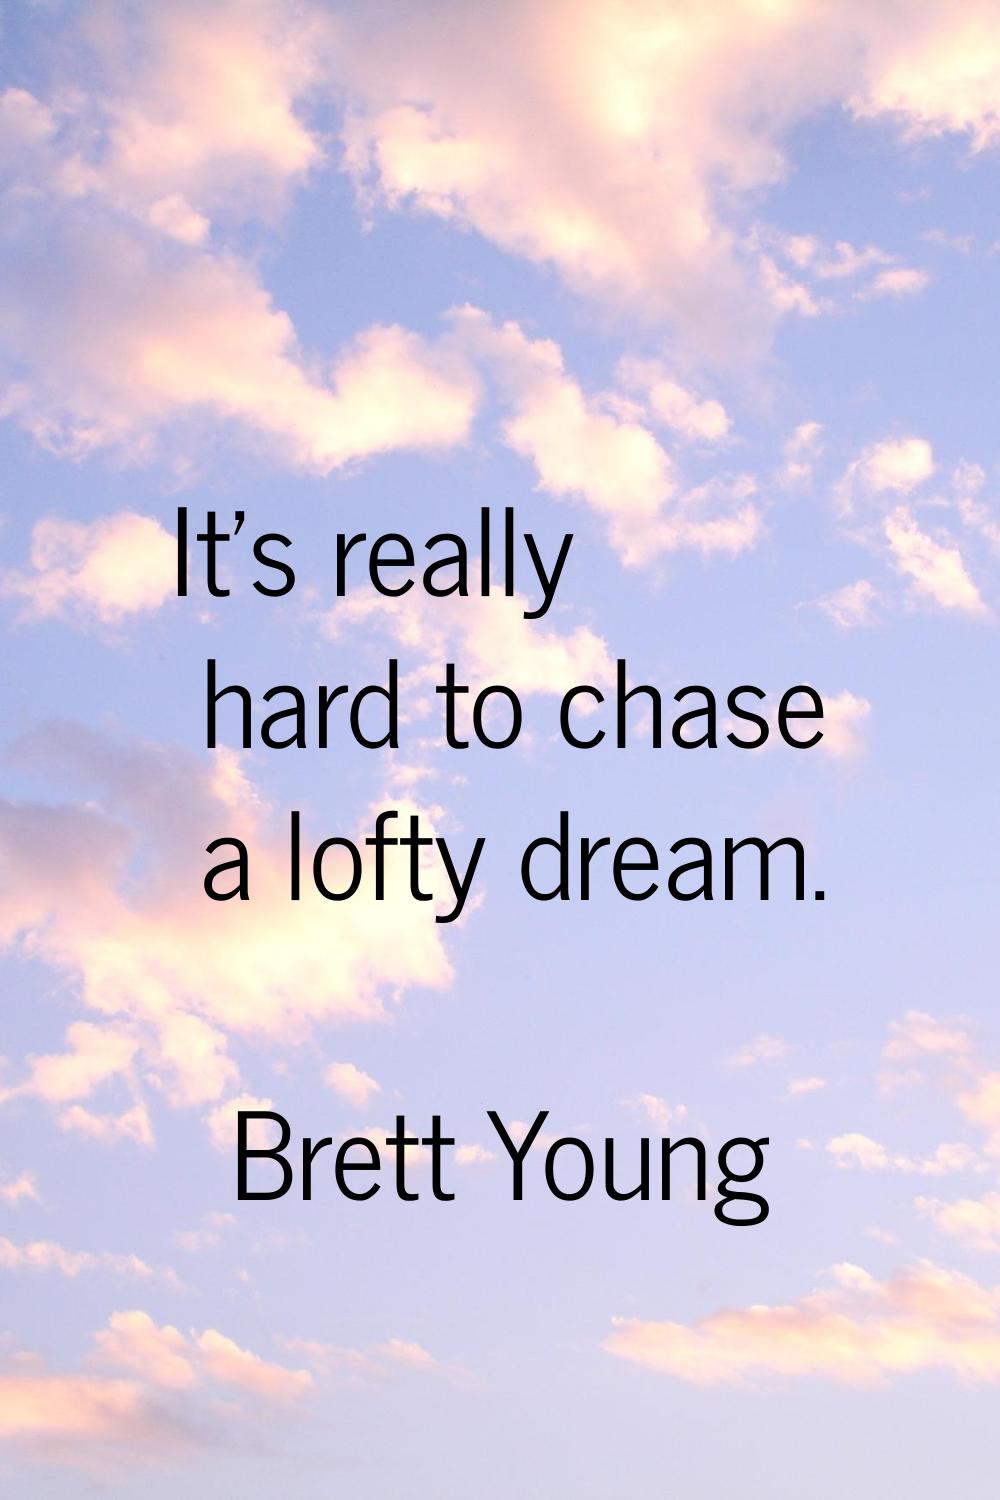 It's really hard to chase a lofty dream.